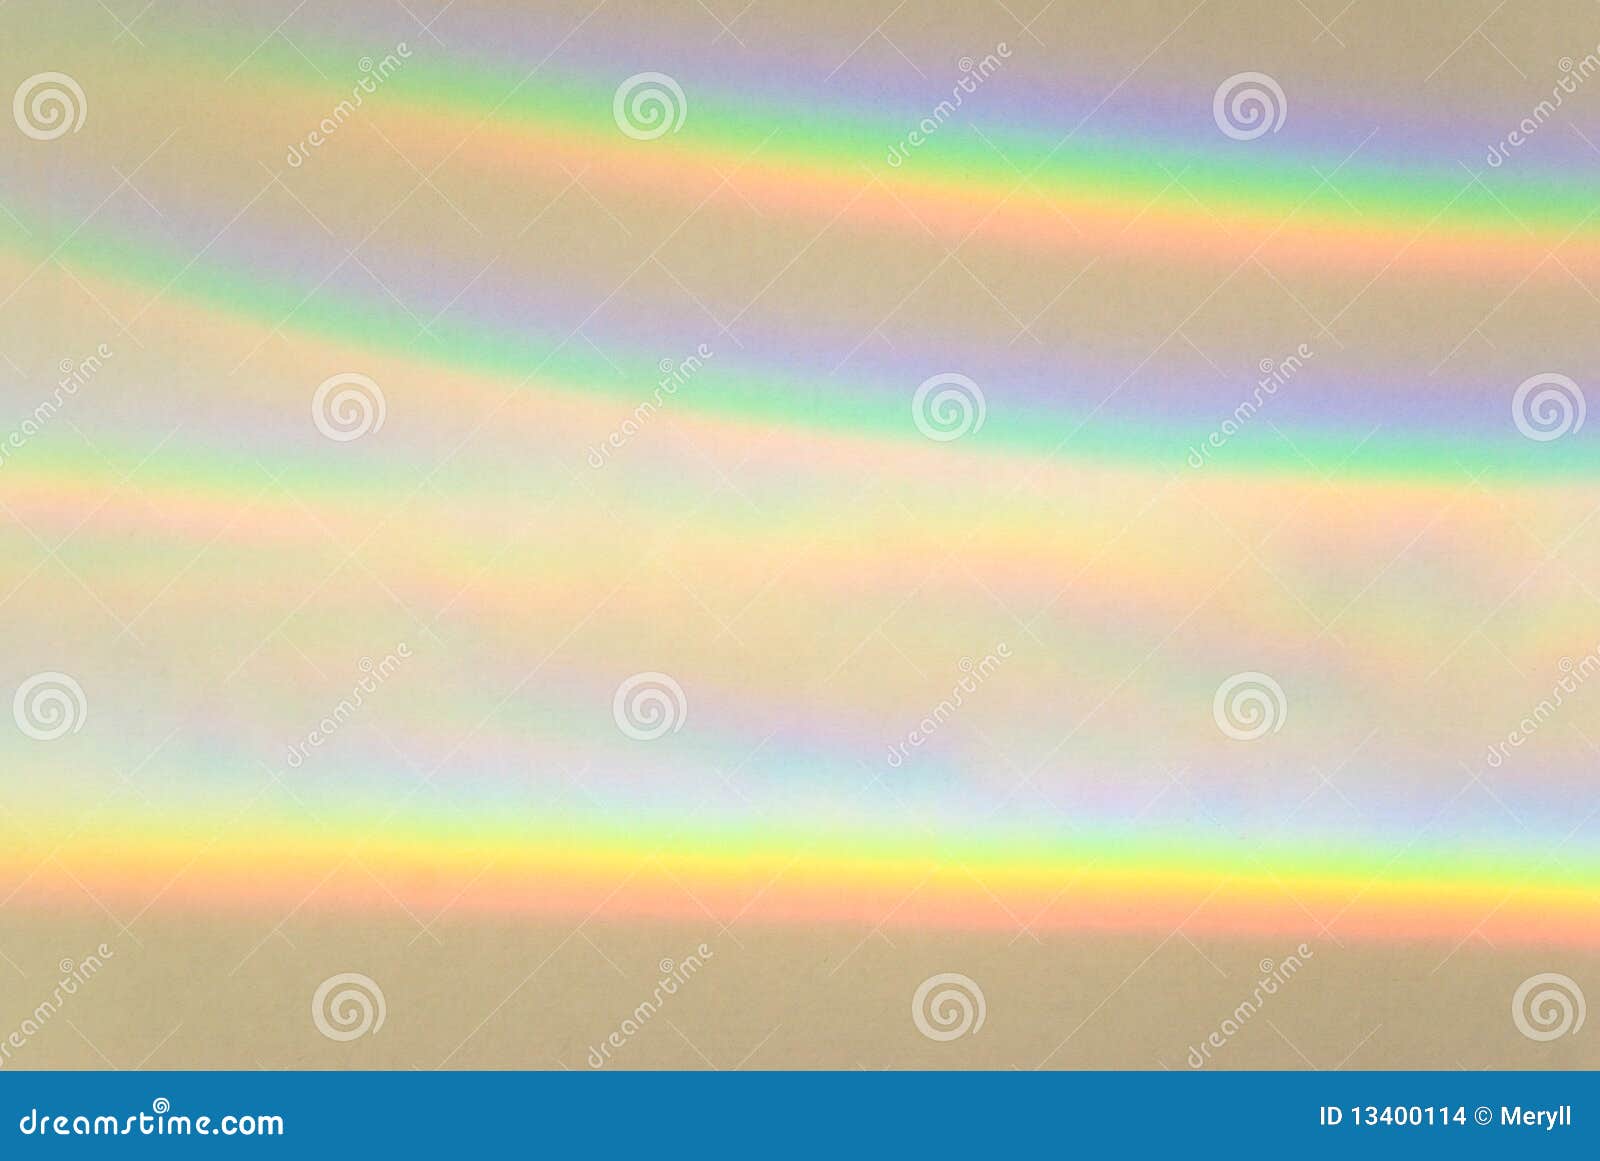 abstract light spectrum, background